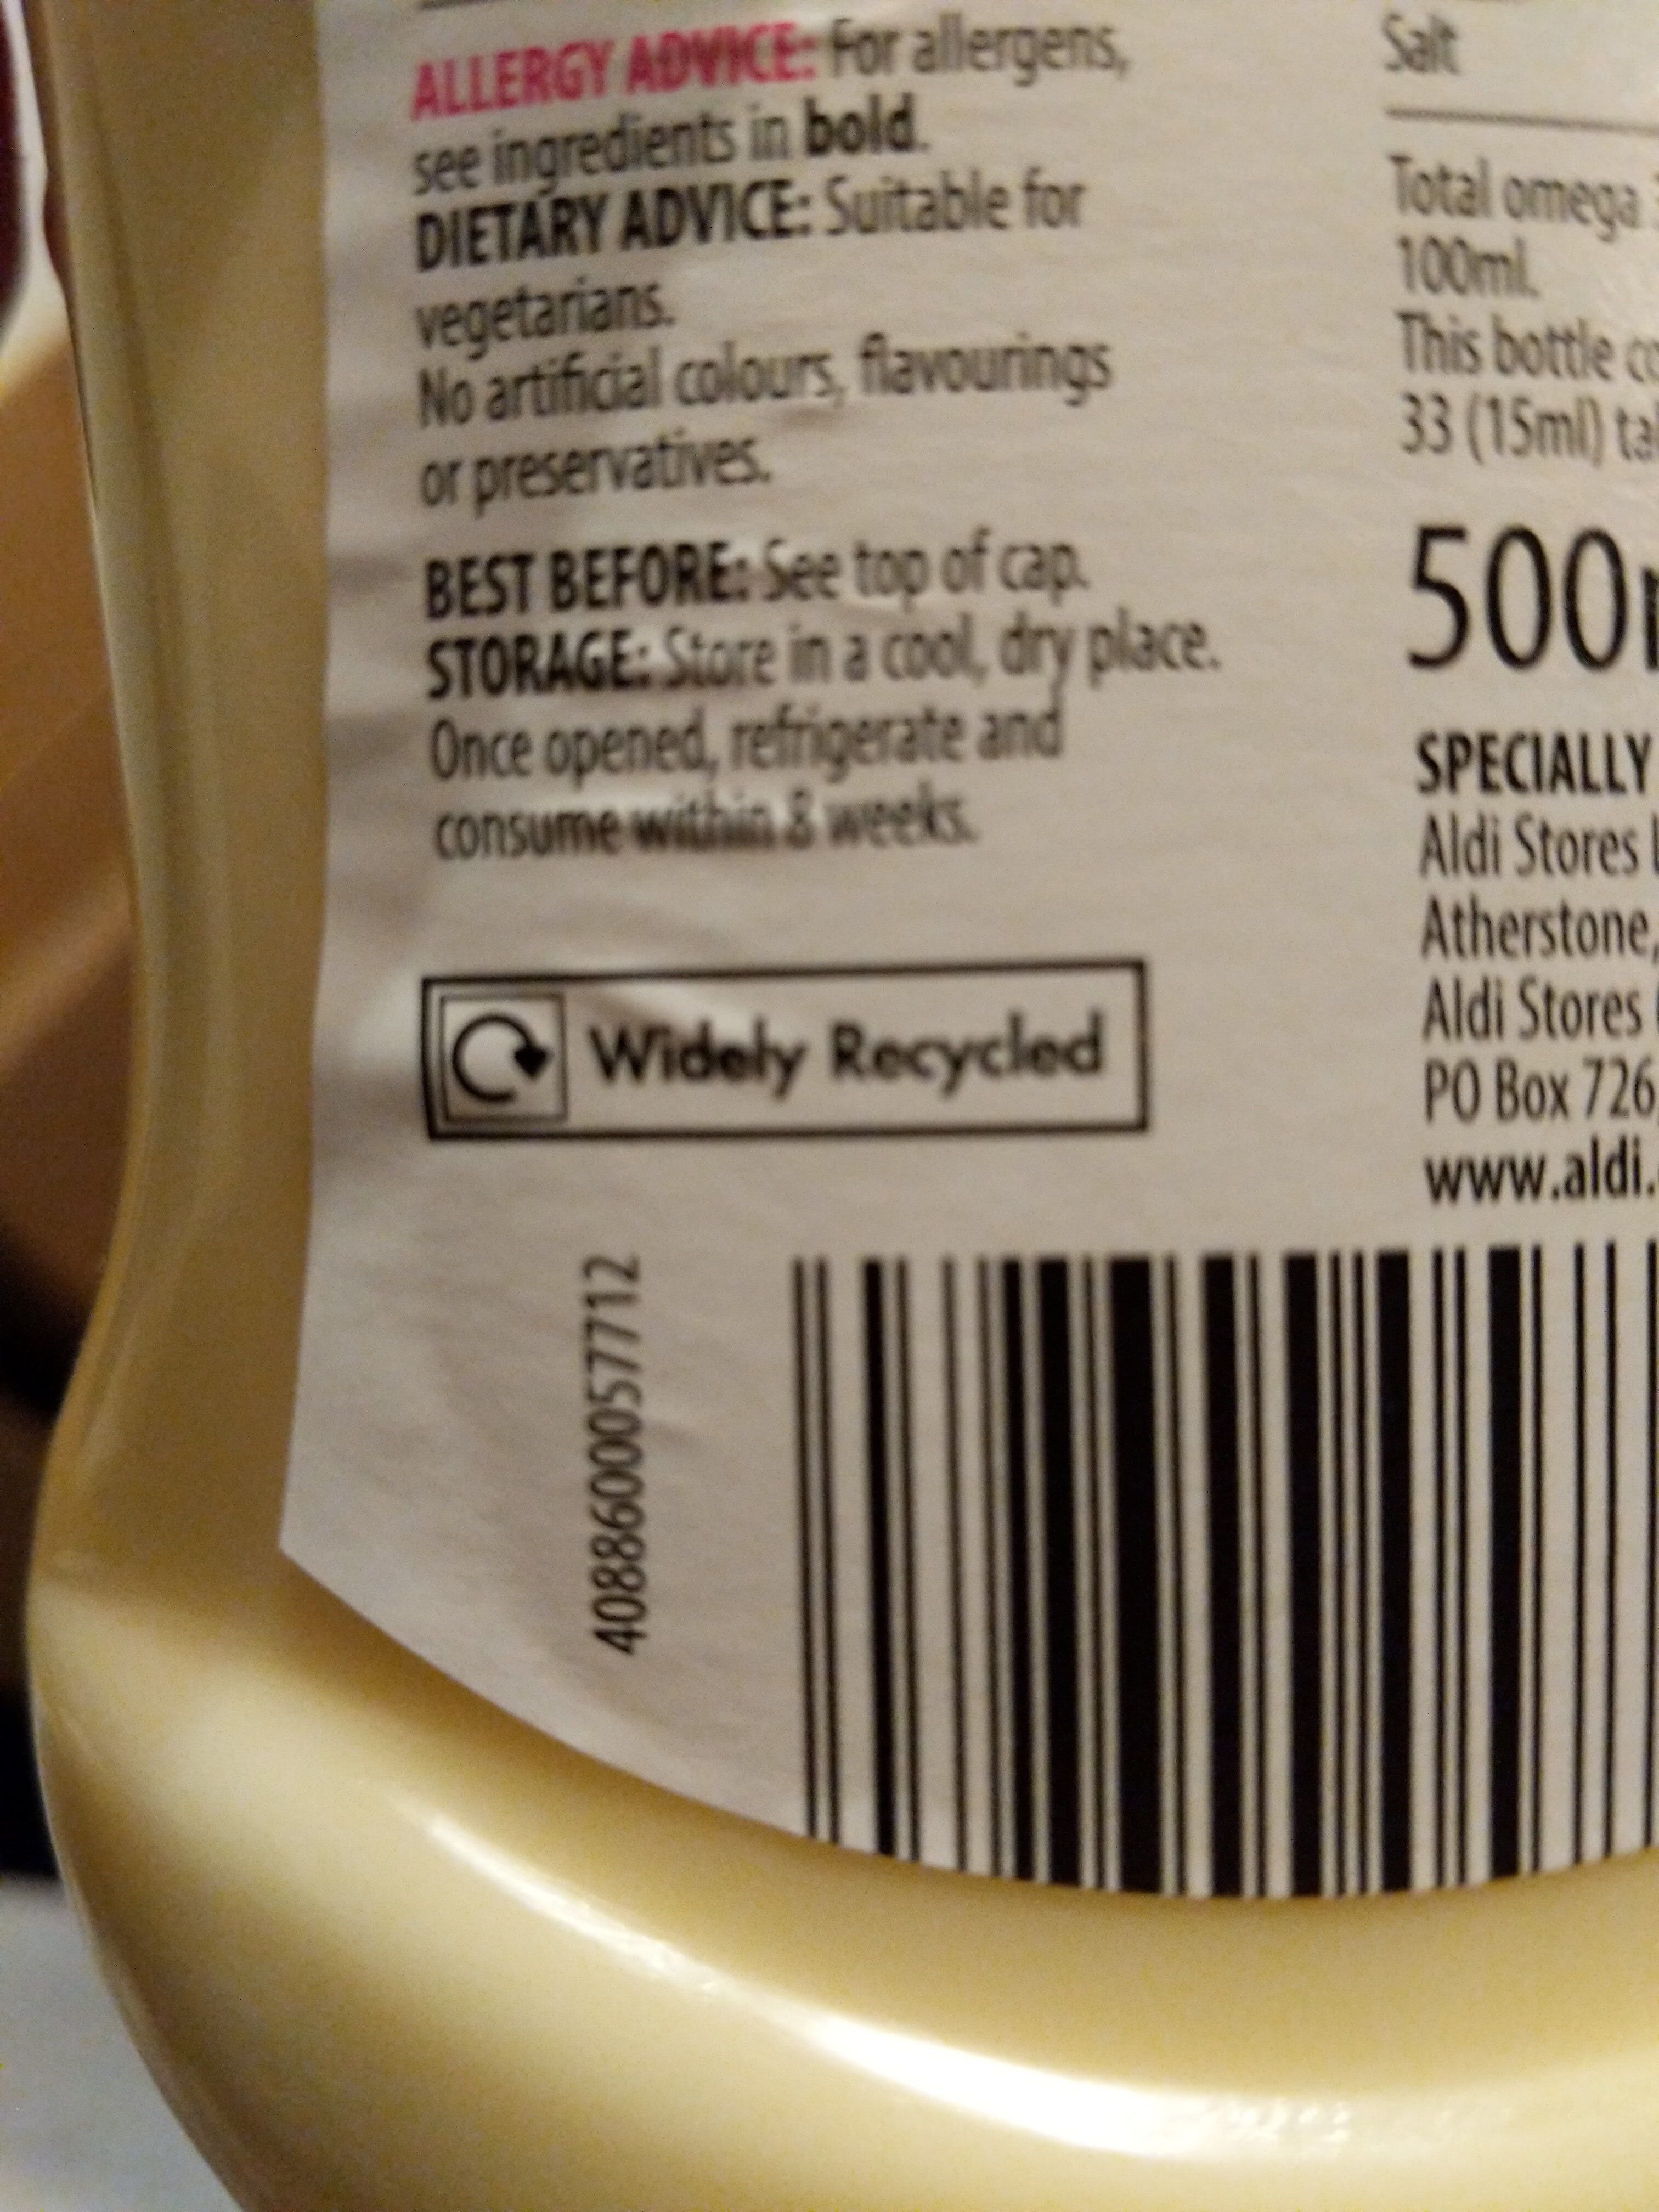 Real mayonnaise - Recycling instructions and/or packaging information